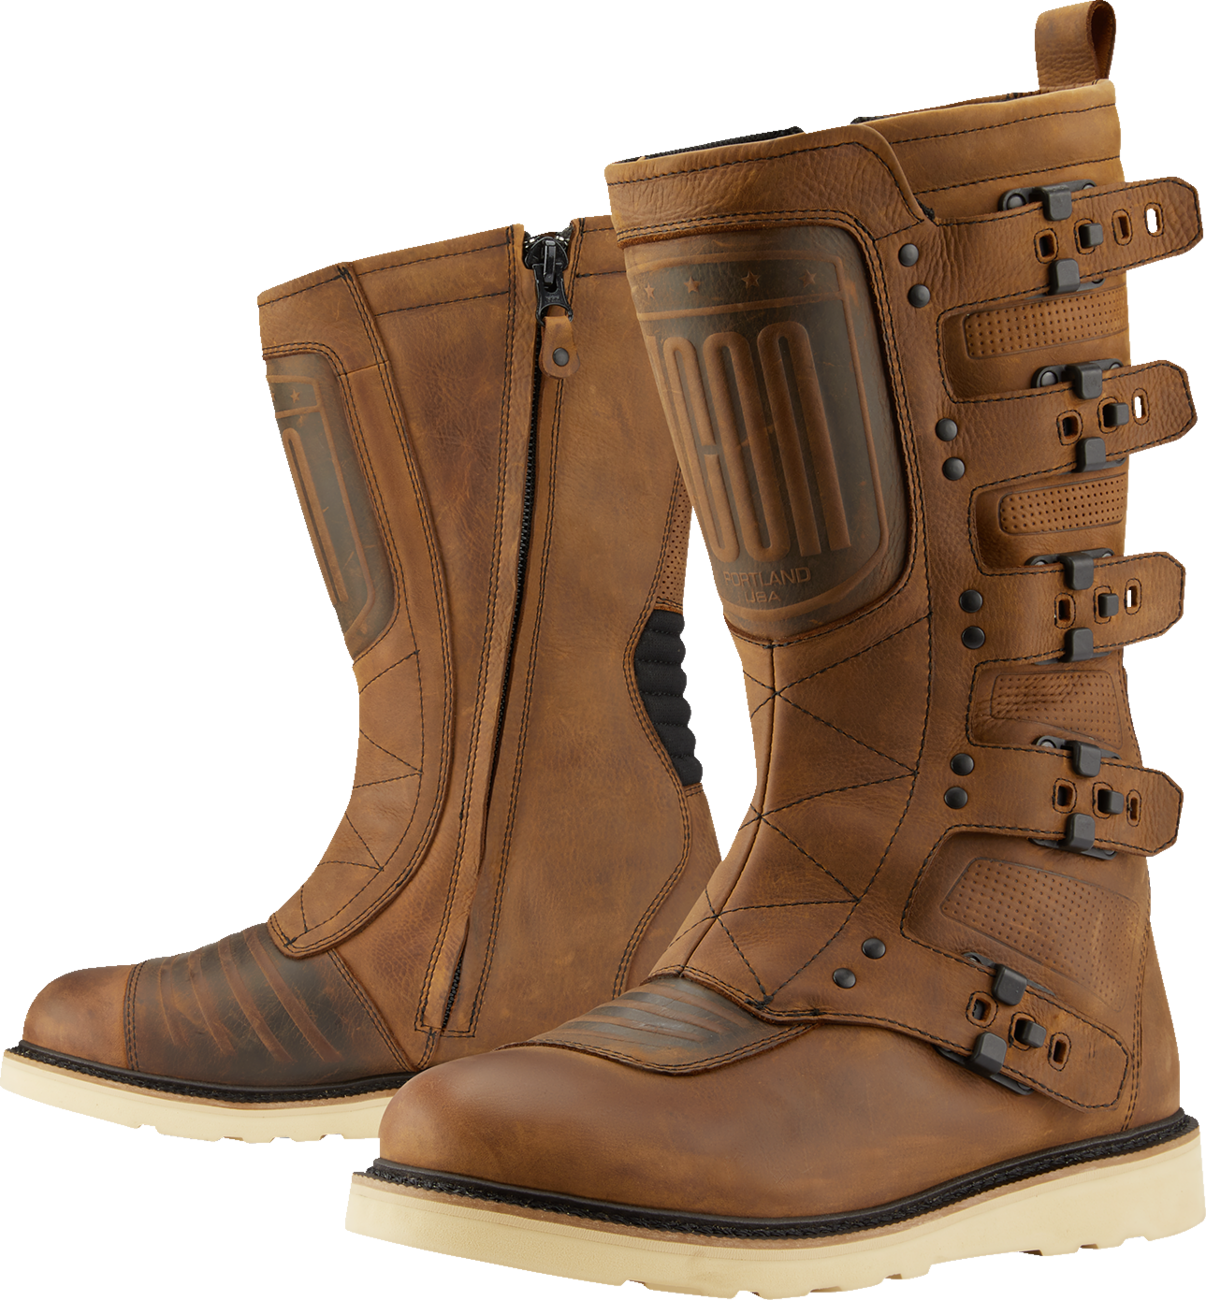 ICON Elsinore 2™ CE Boots - Brown - Size 12 3403-1229